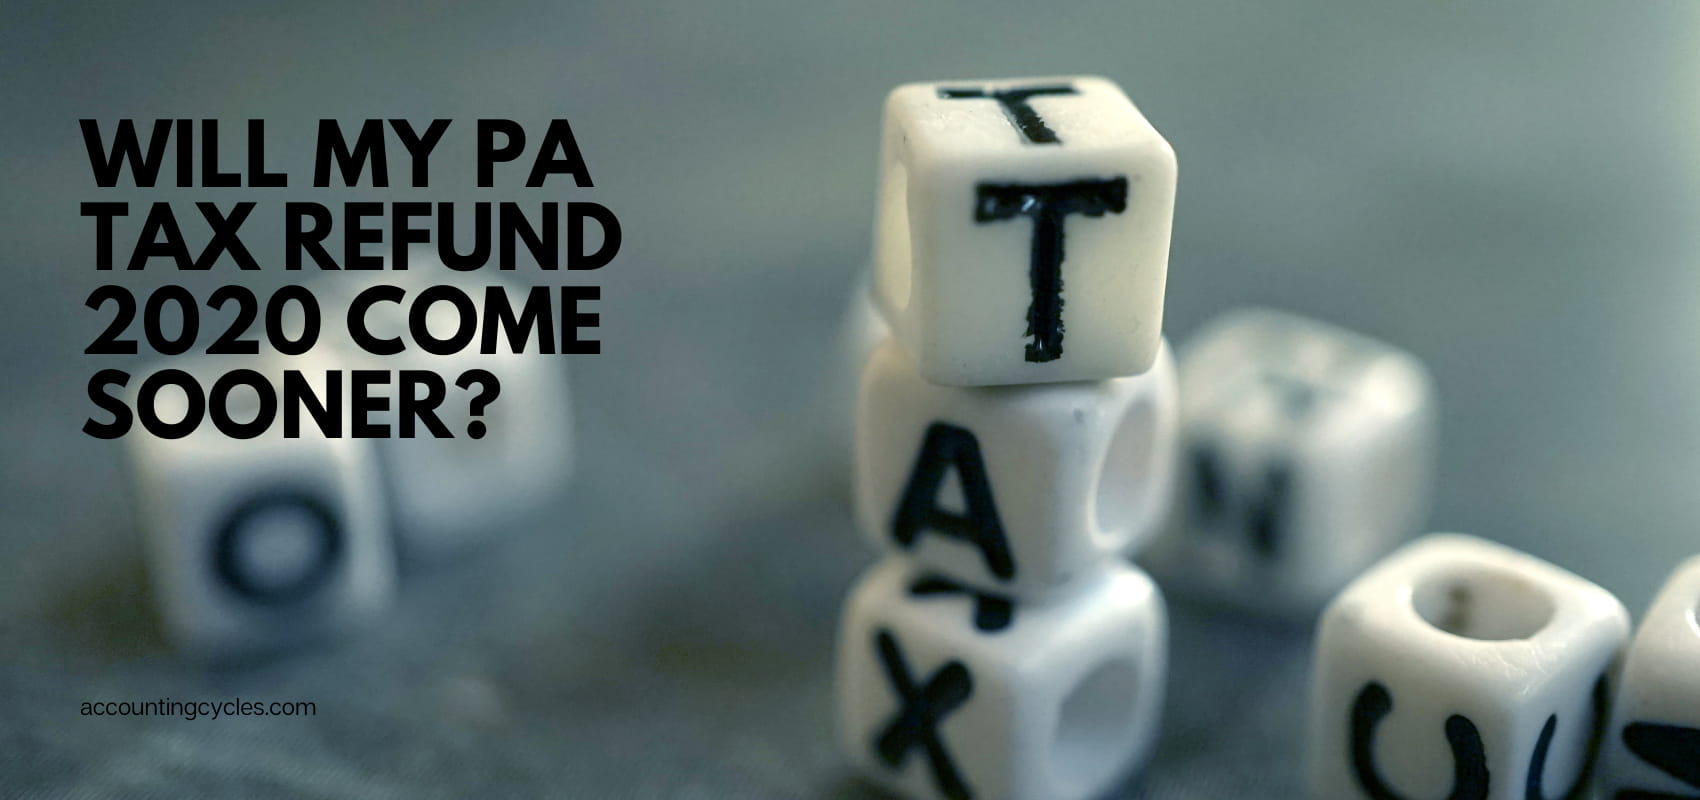 Will my PA Tax Refund 2020 come sooner?